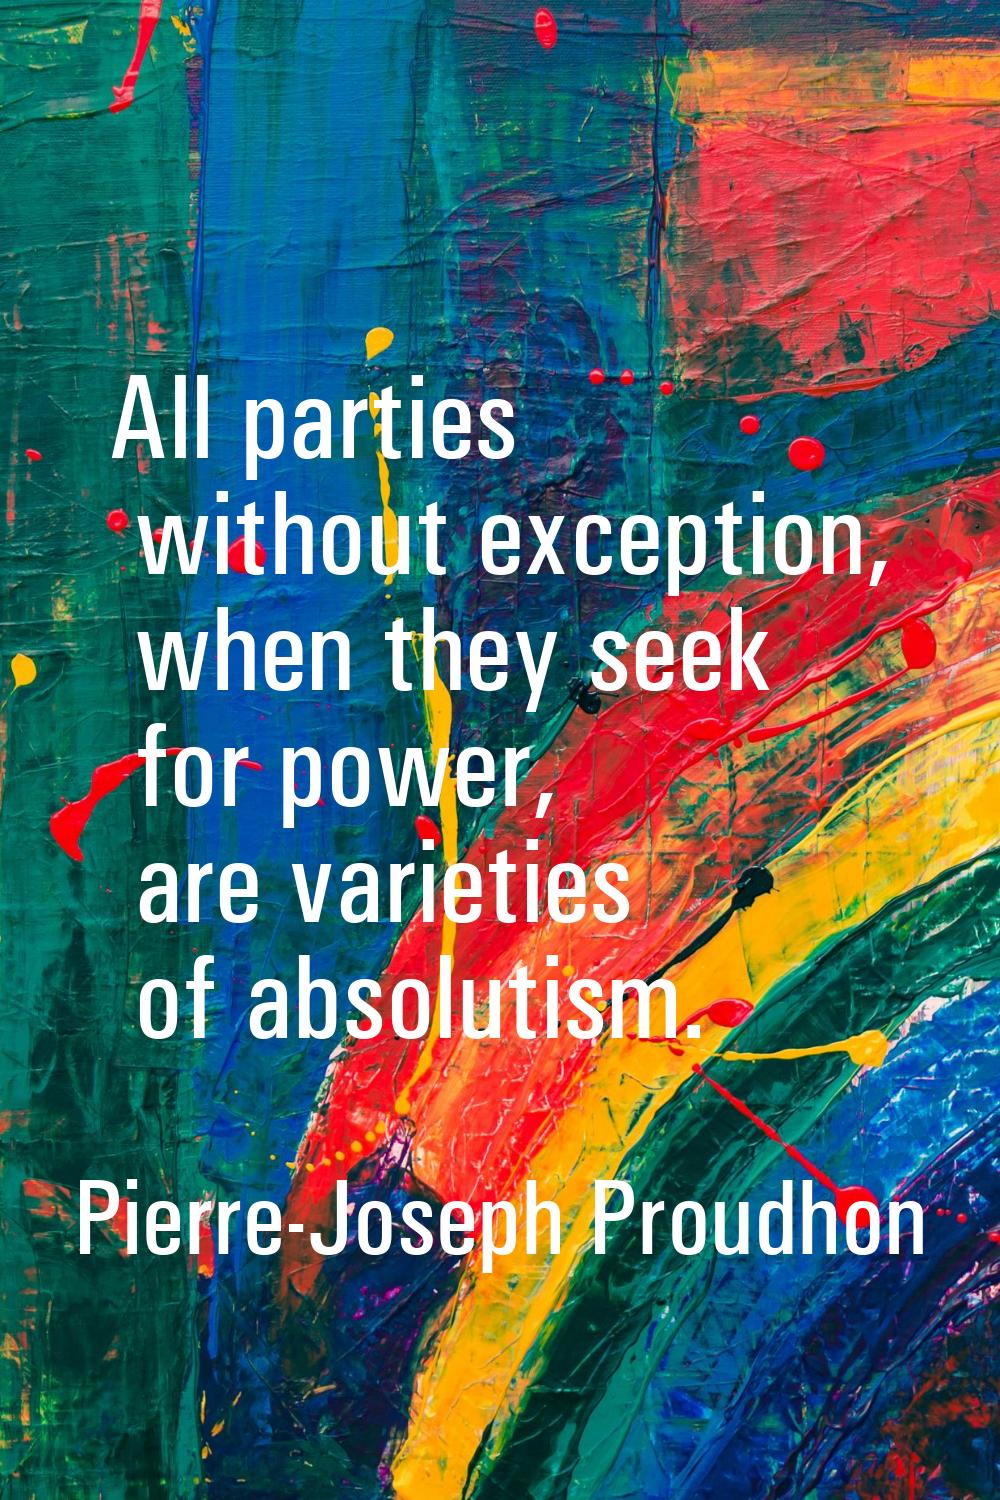 All parties without exception, when they seek for power, are varieties of absolutism.